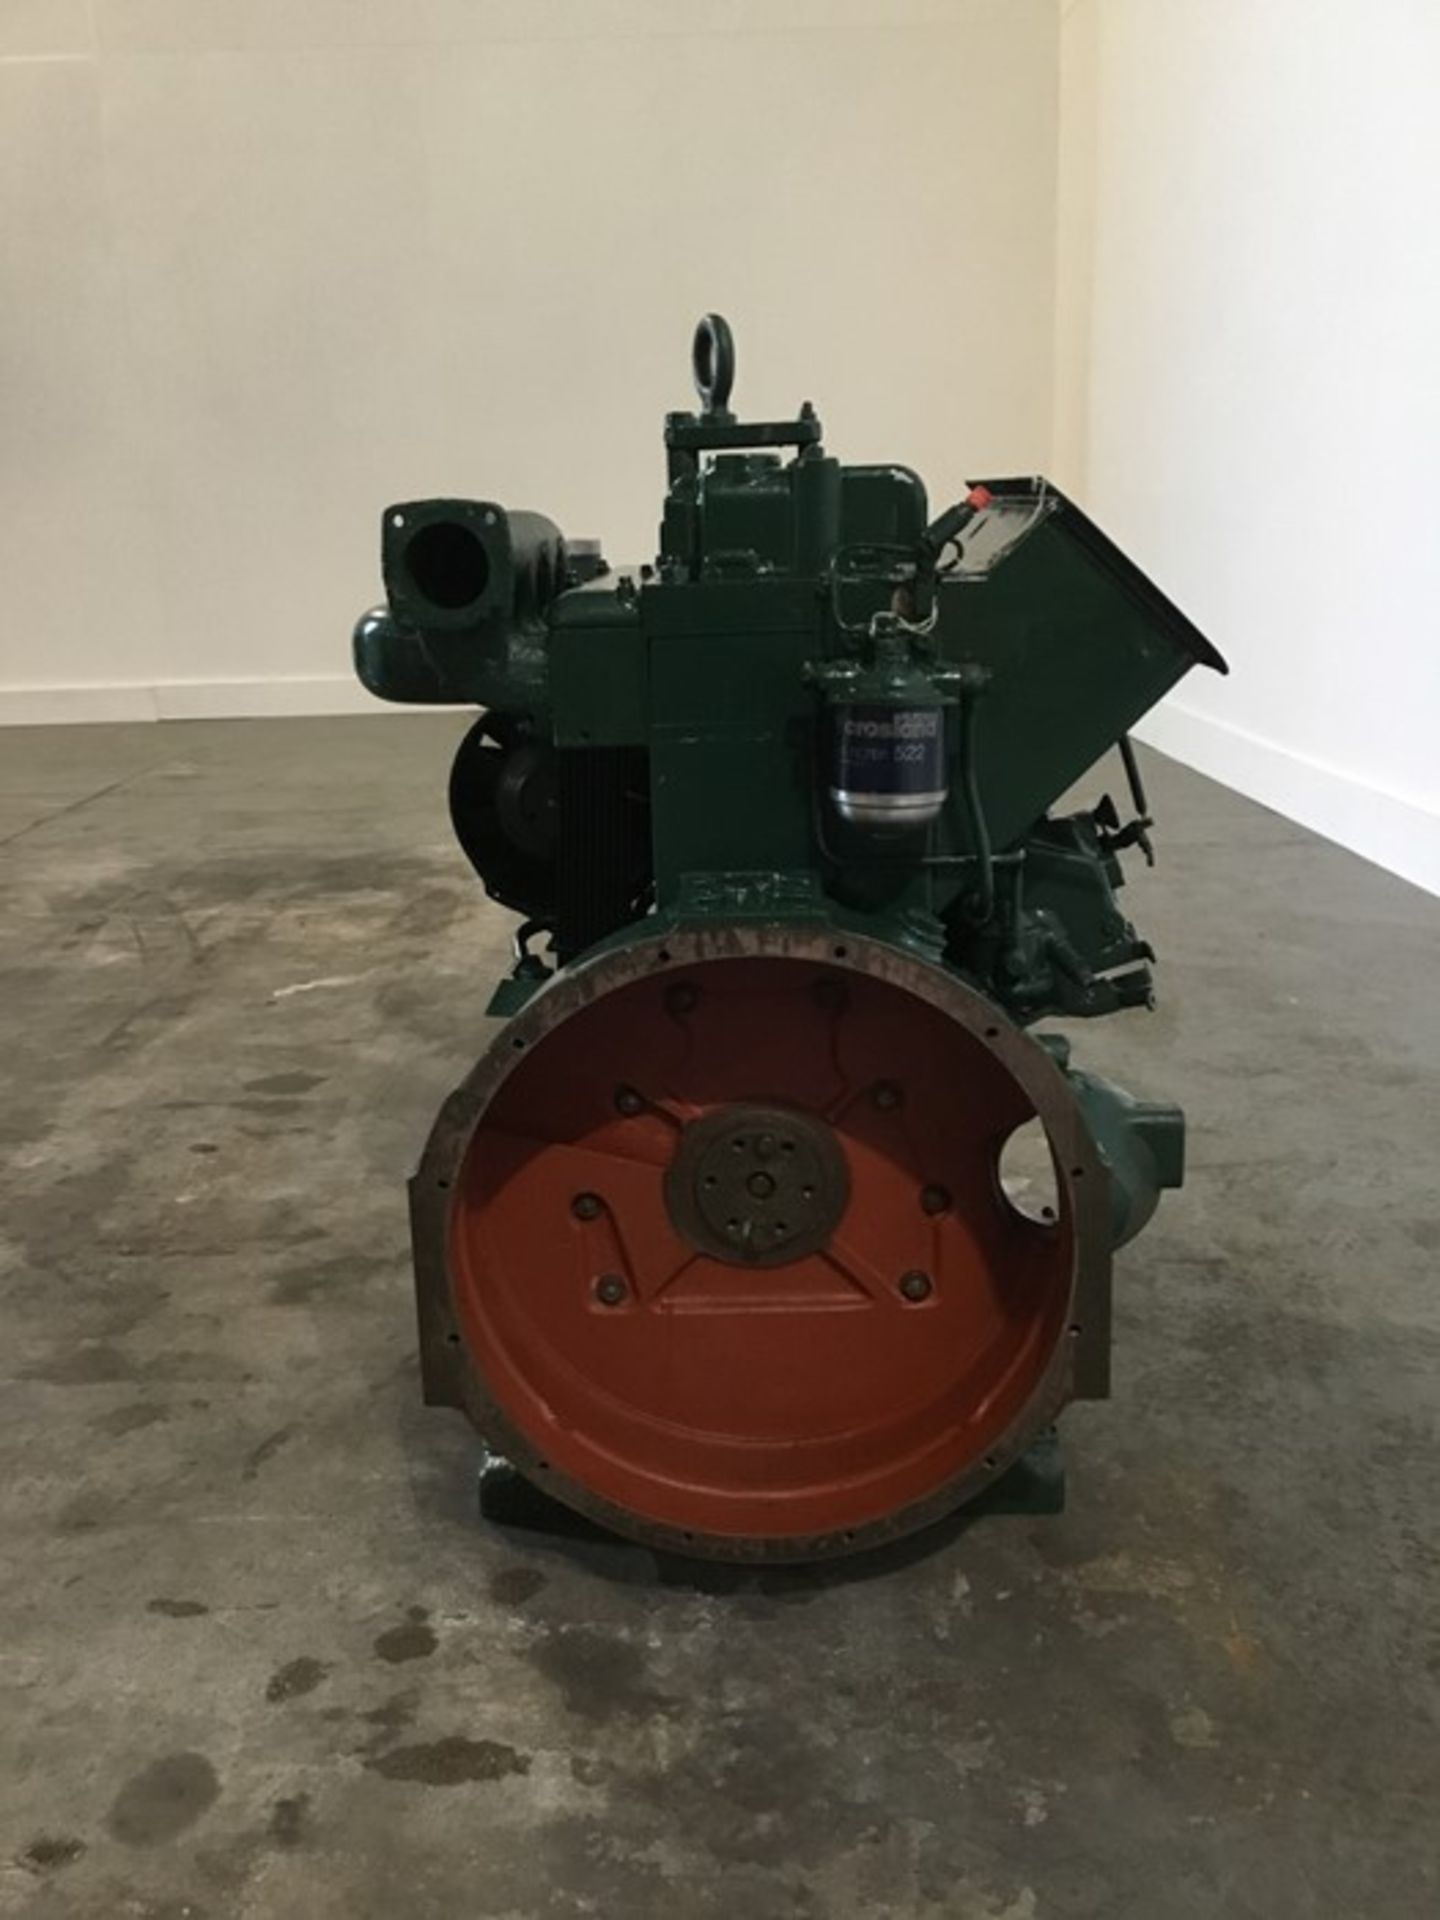 Lister 4cyl Diesel Engine: Lister 4cyl non turbo low hours - Image 11 of 18